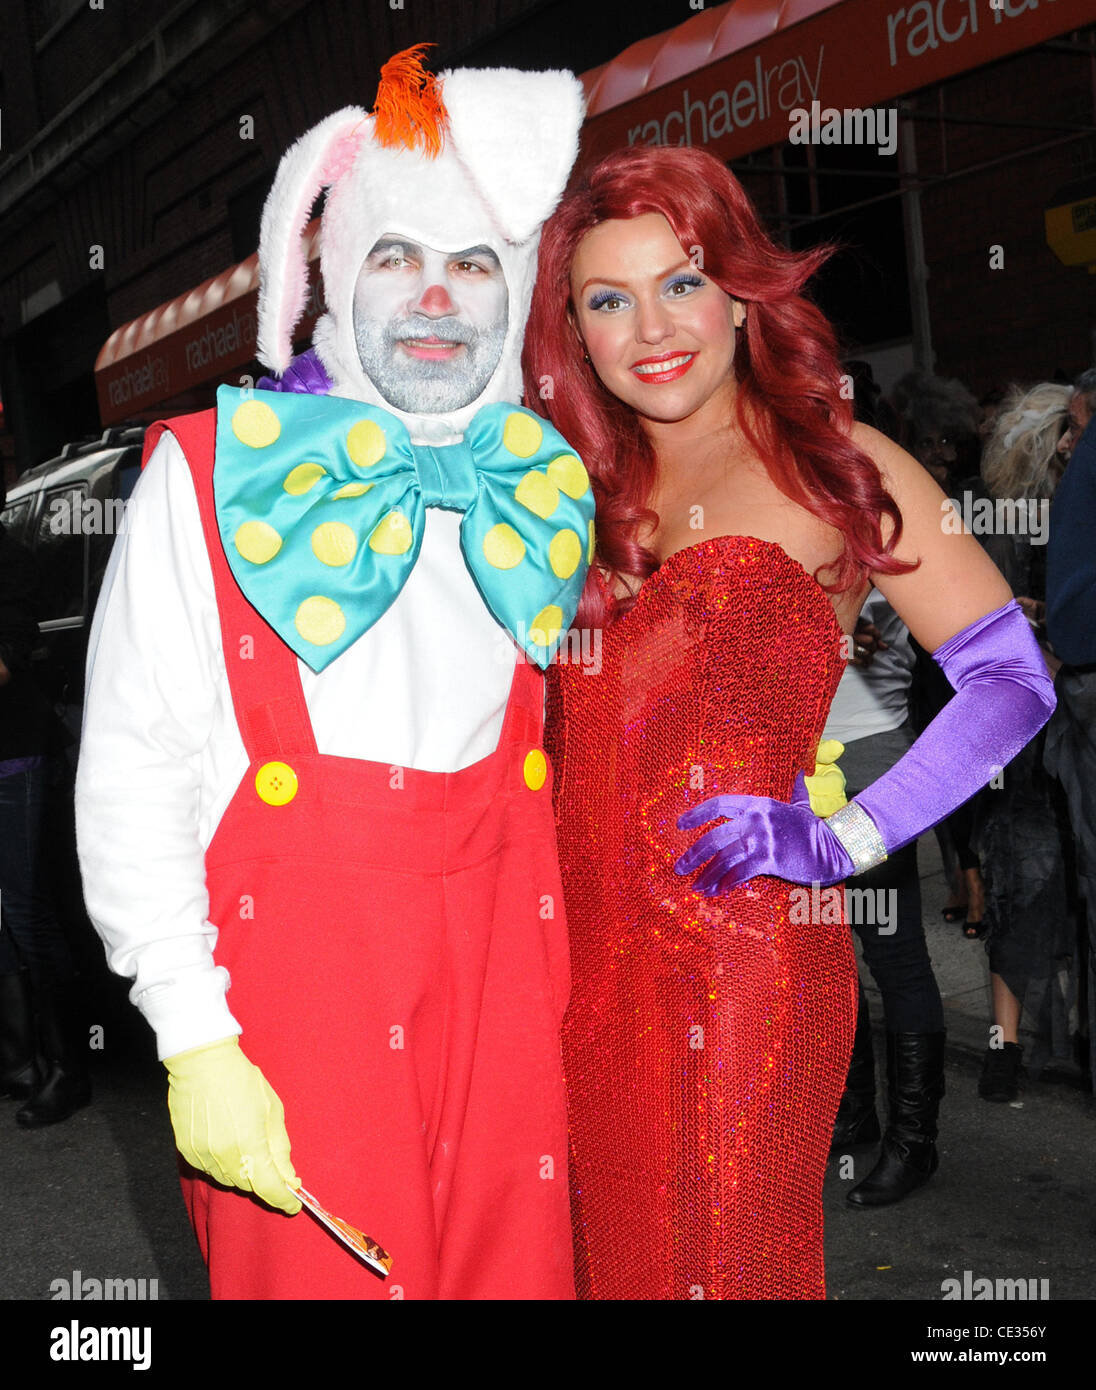 Roger and jessica rabbit costumes